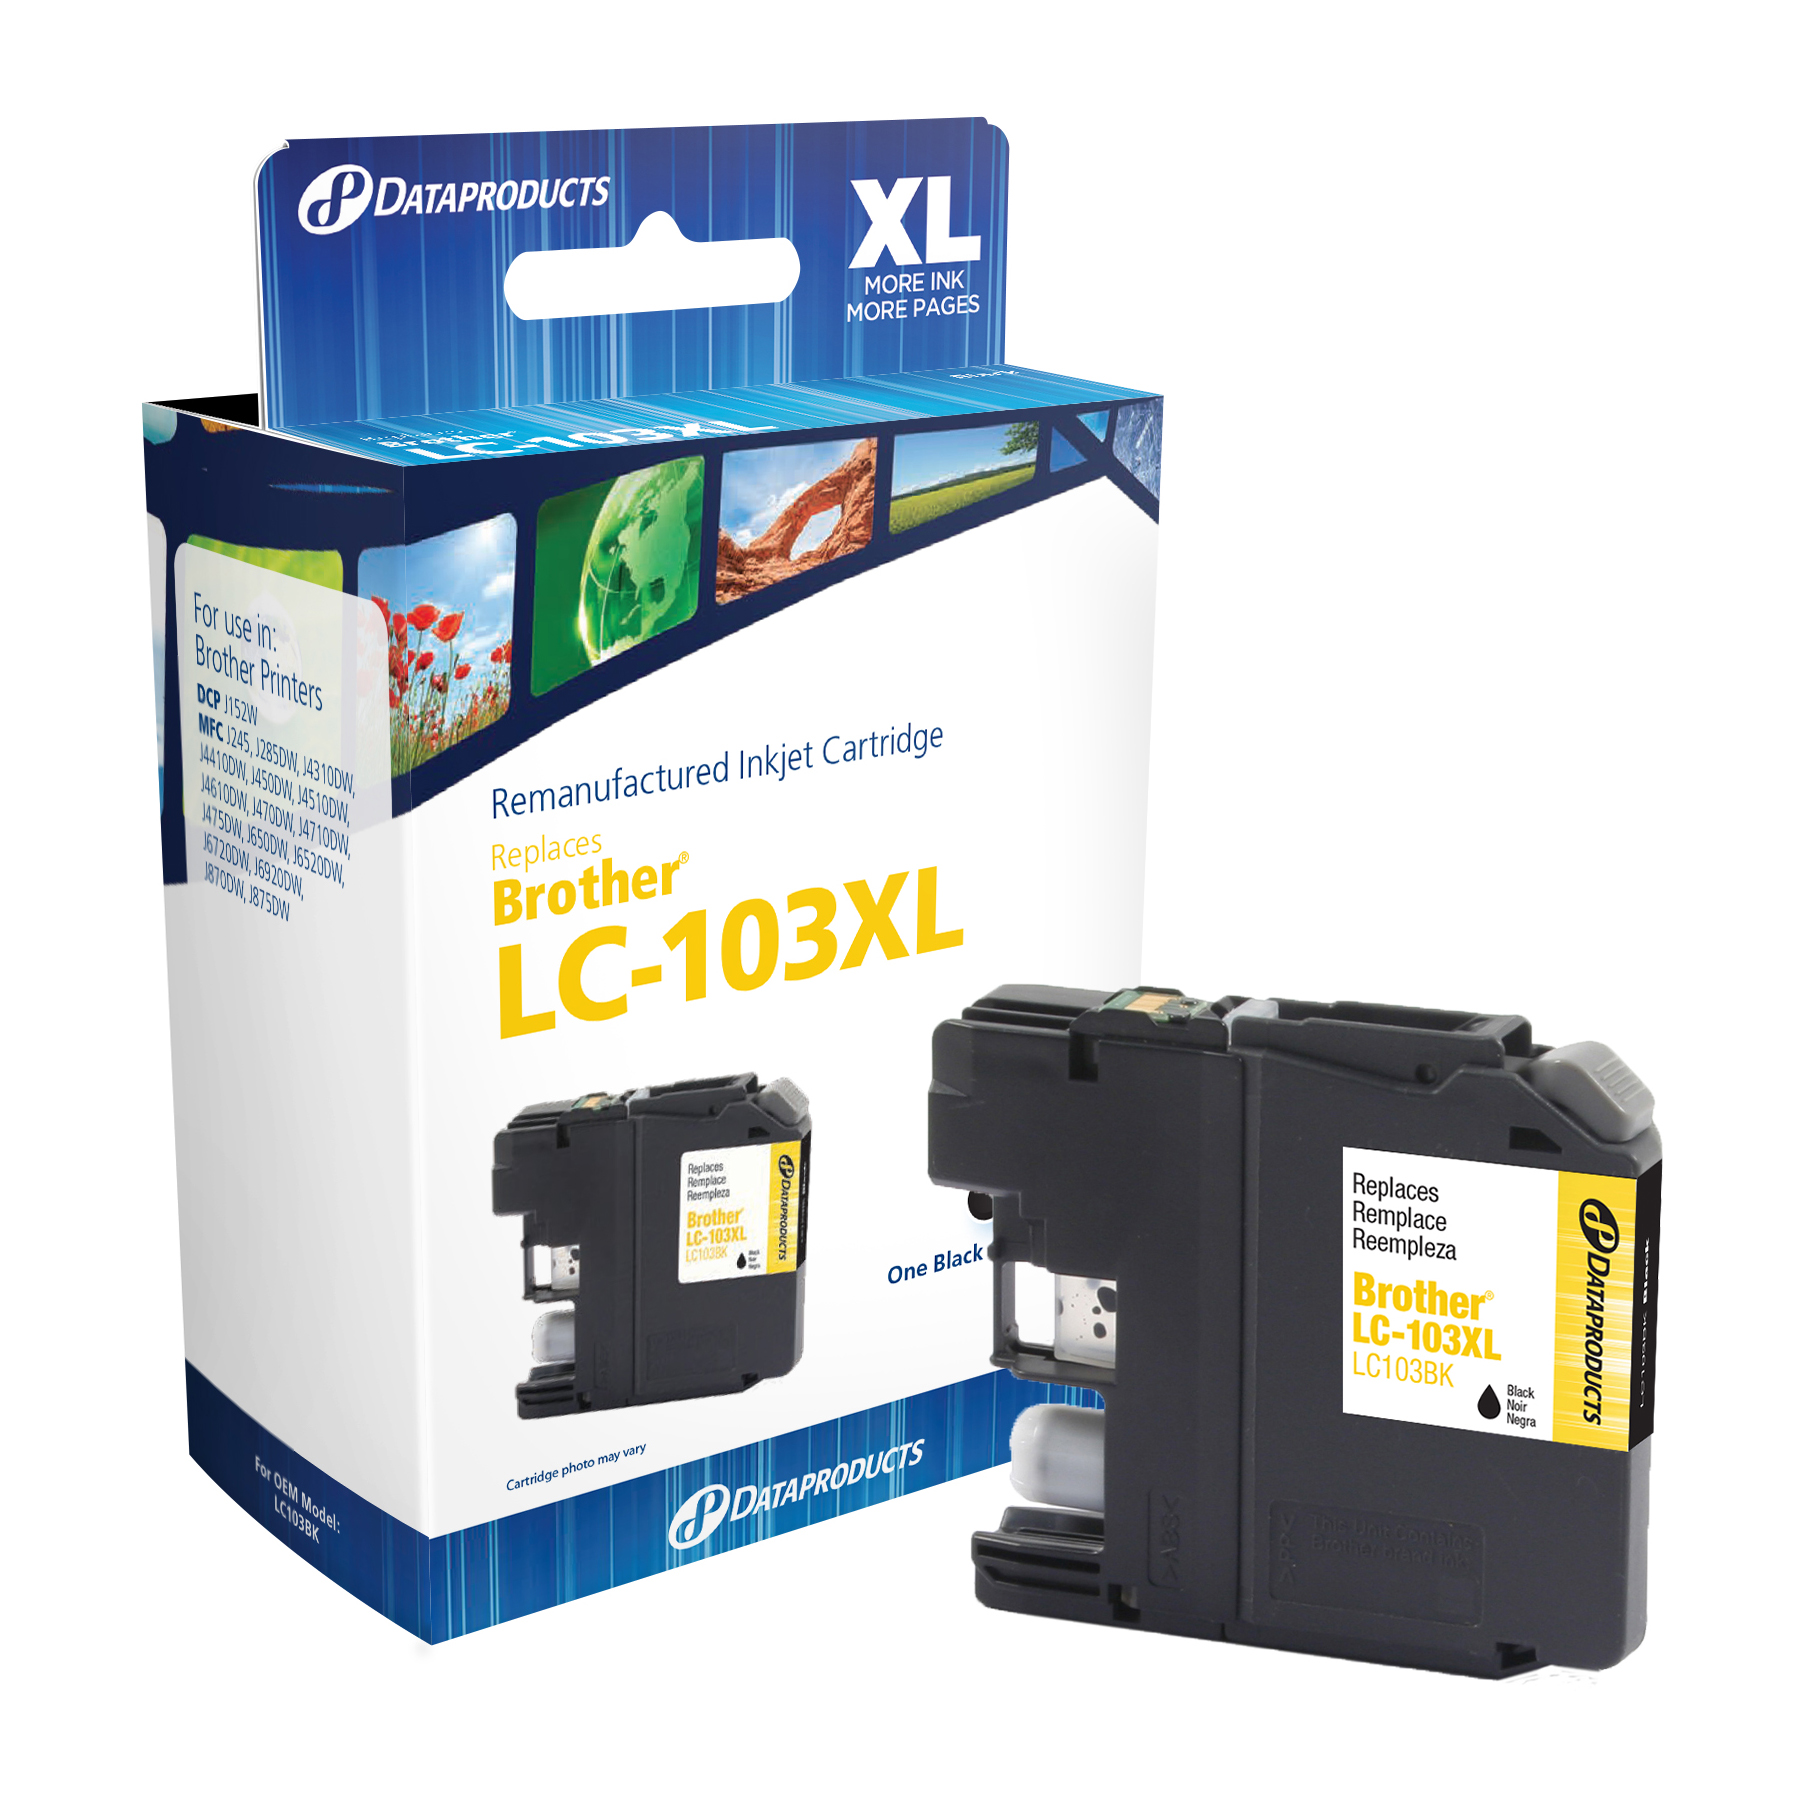 Dataproducts DPCLC103B Remanufactured Inkjet Cartridge for Brother LC-103XL - High Yield Black Ink